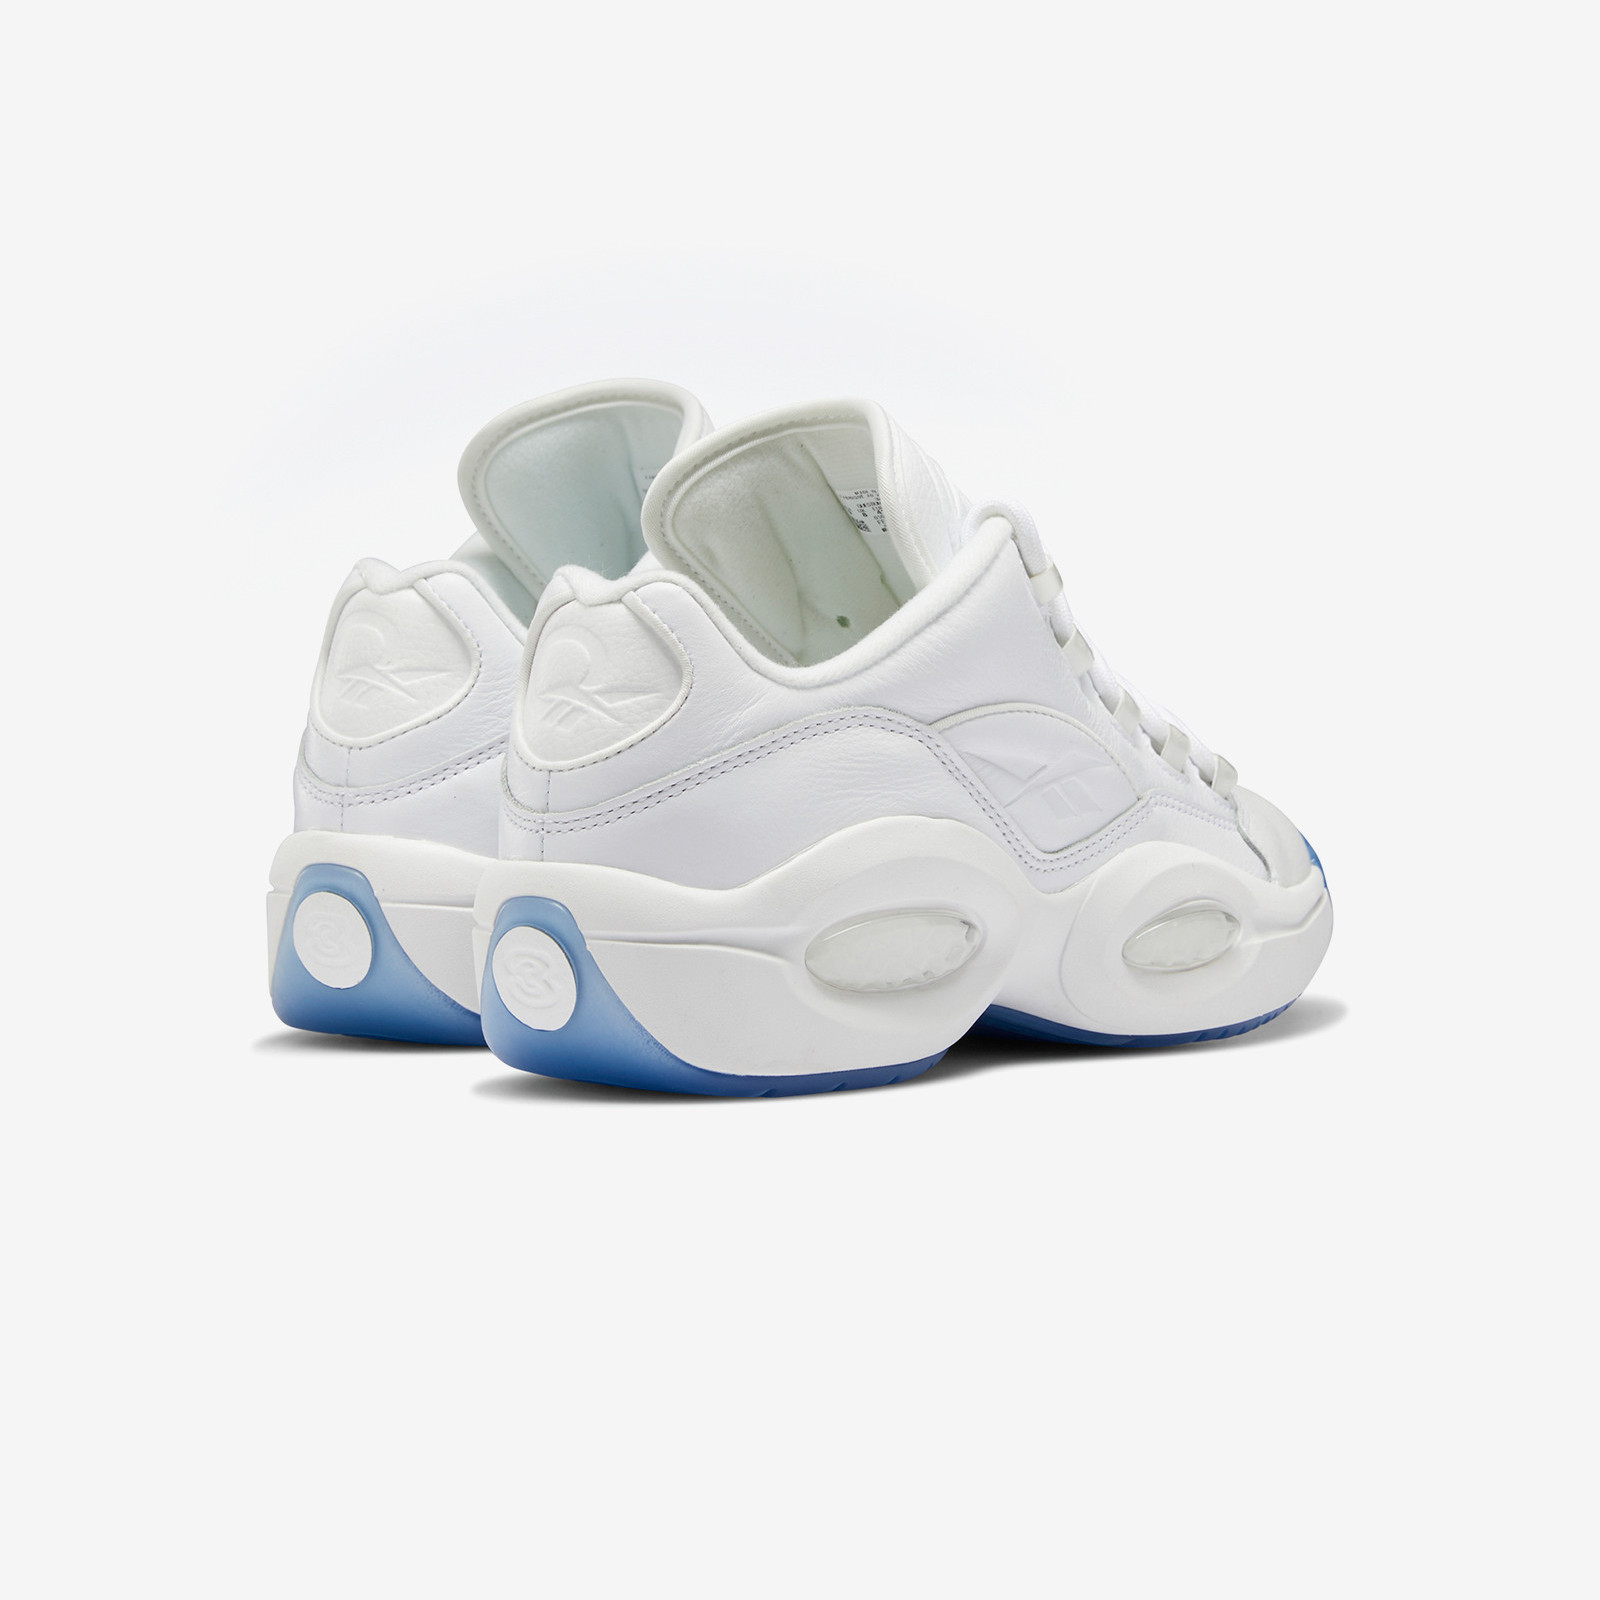 Reebok Question Low
White / Clear